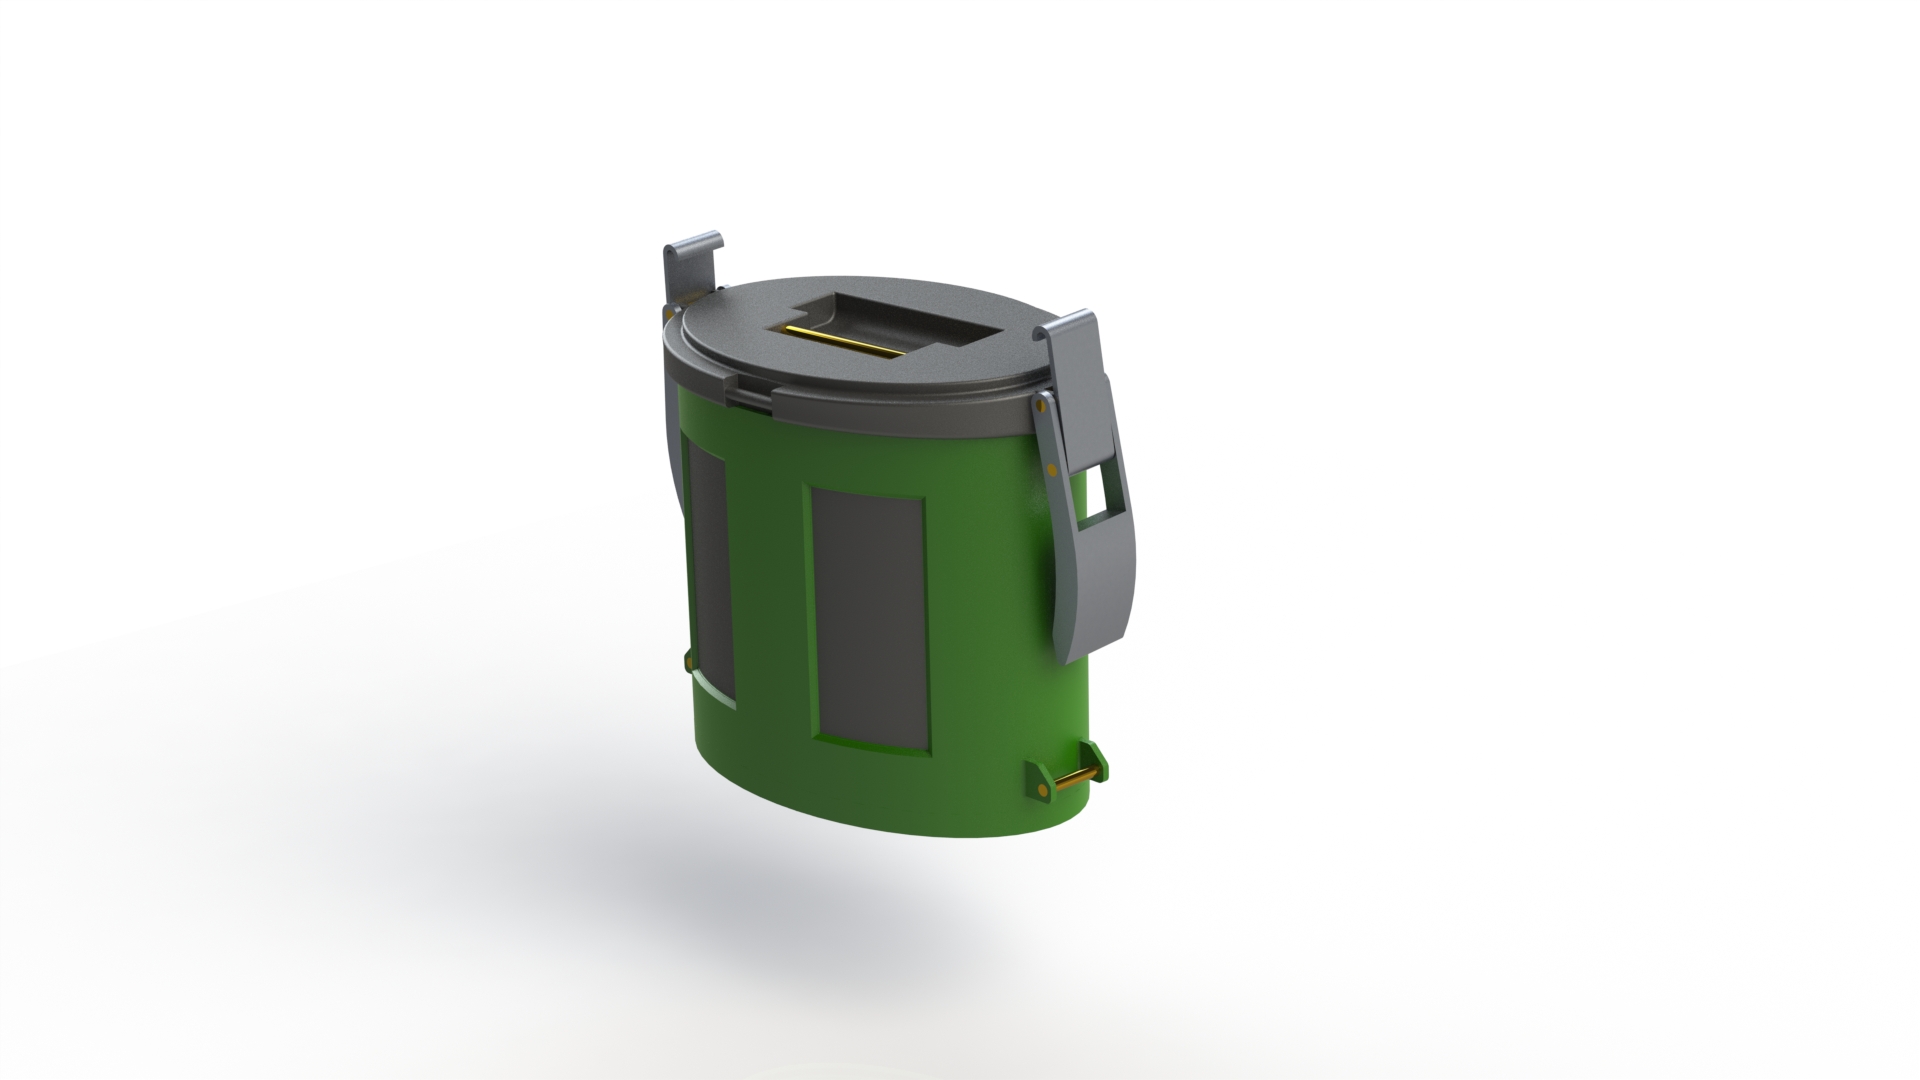 Canister_Product_Development_Rendering_Peterman_Design_Firm_single_unit_design_cad_outdoors